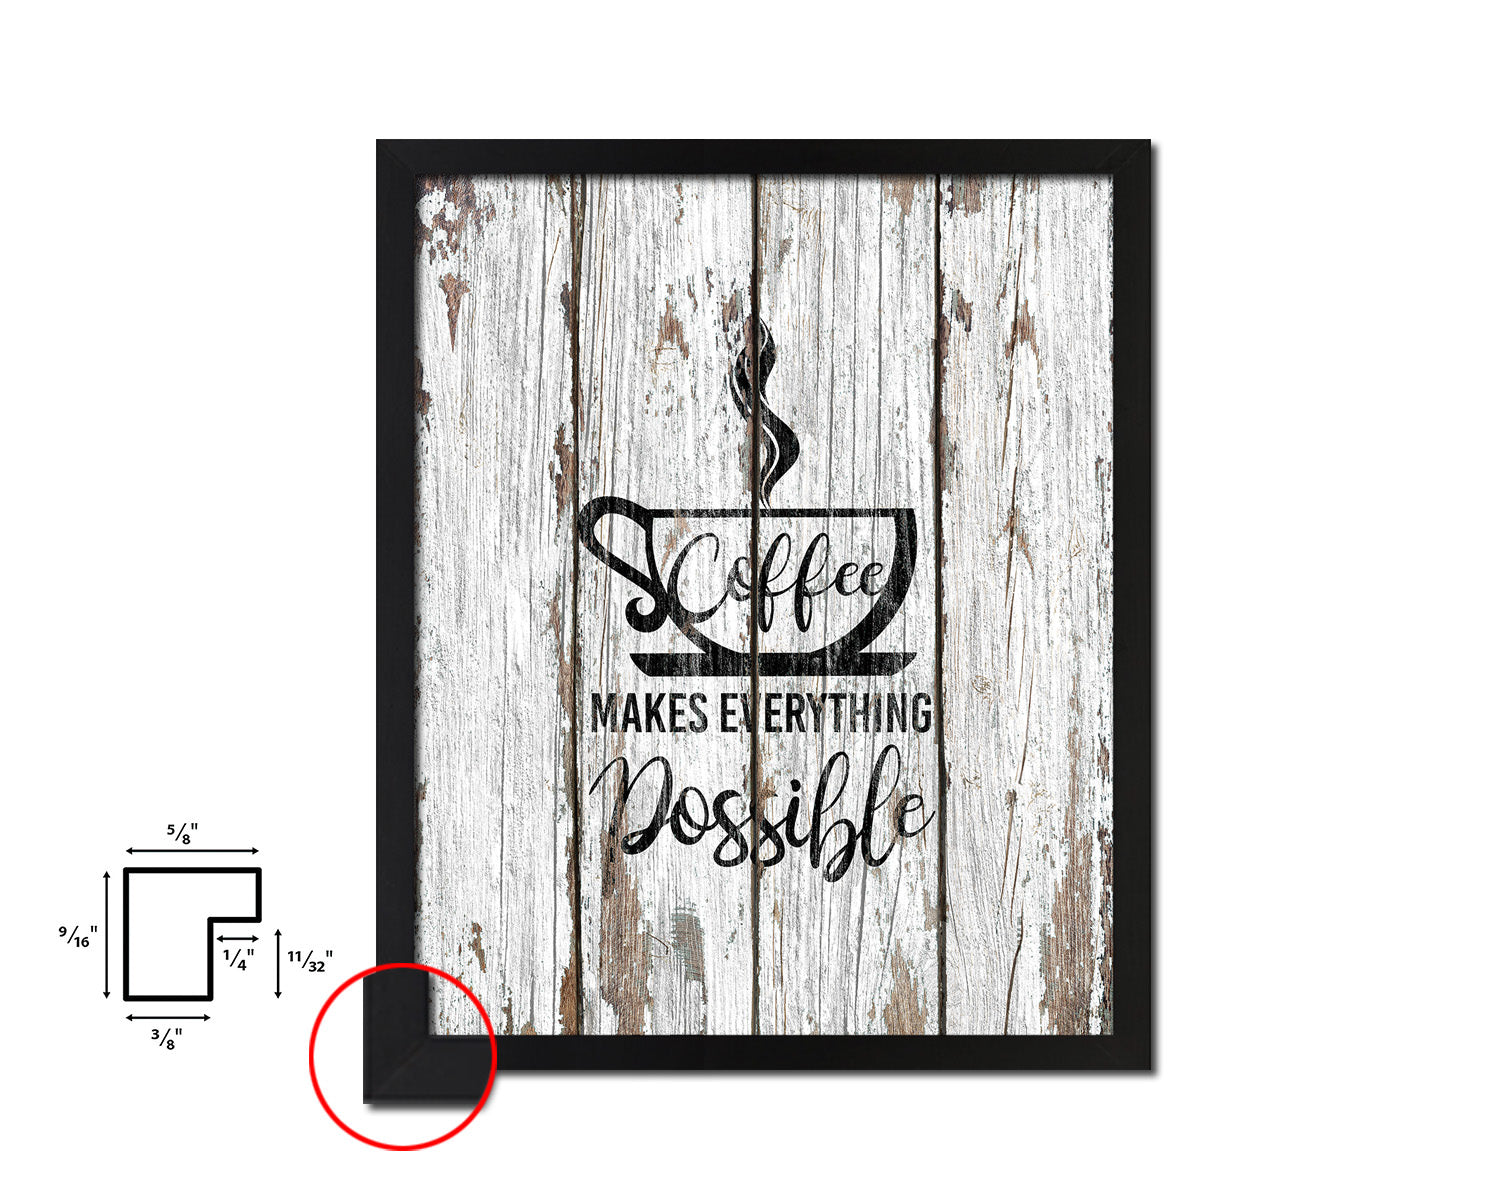 Coffee makes everything possible Quote Framed Artwork Print Wall Decor Art Gifts